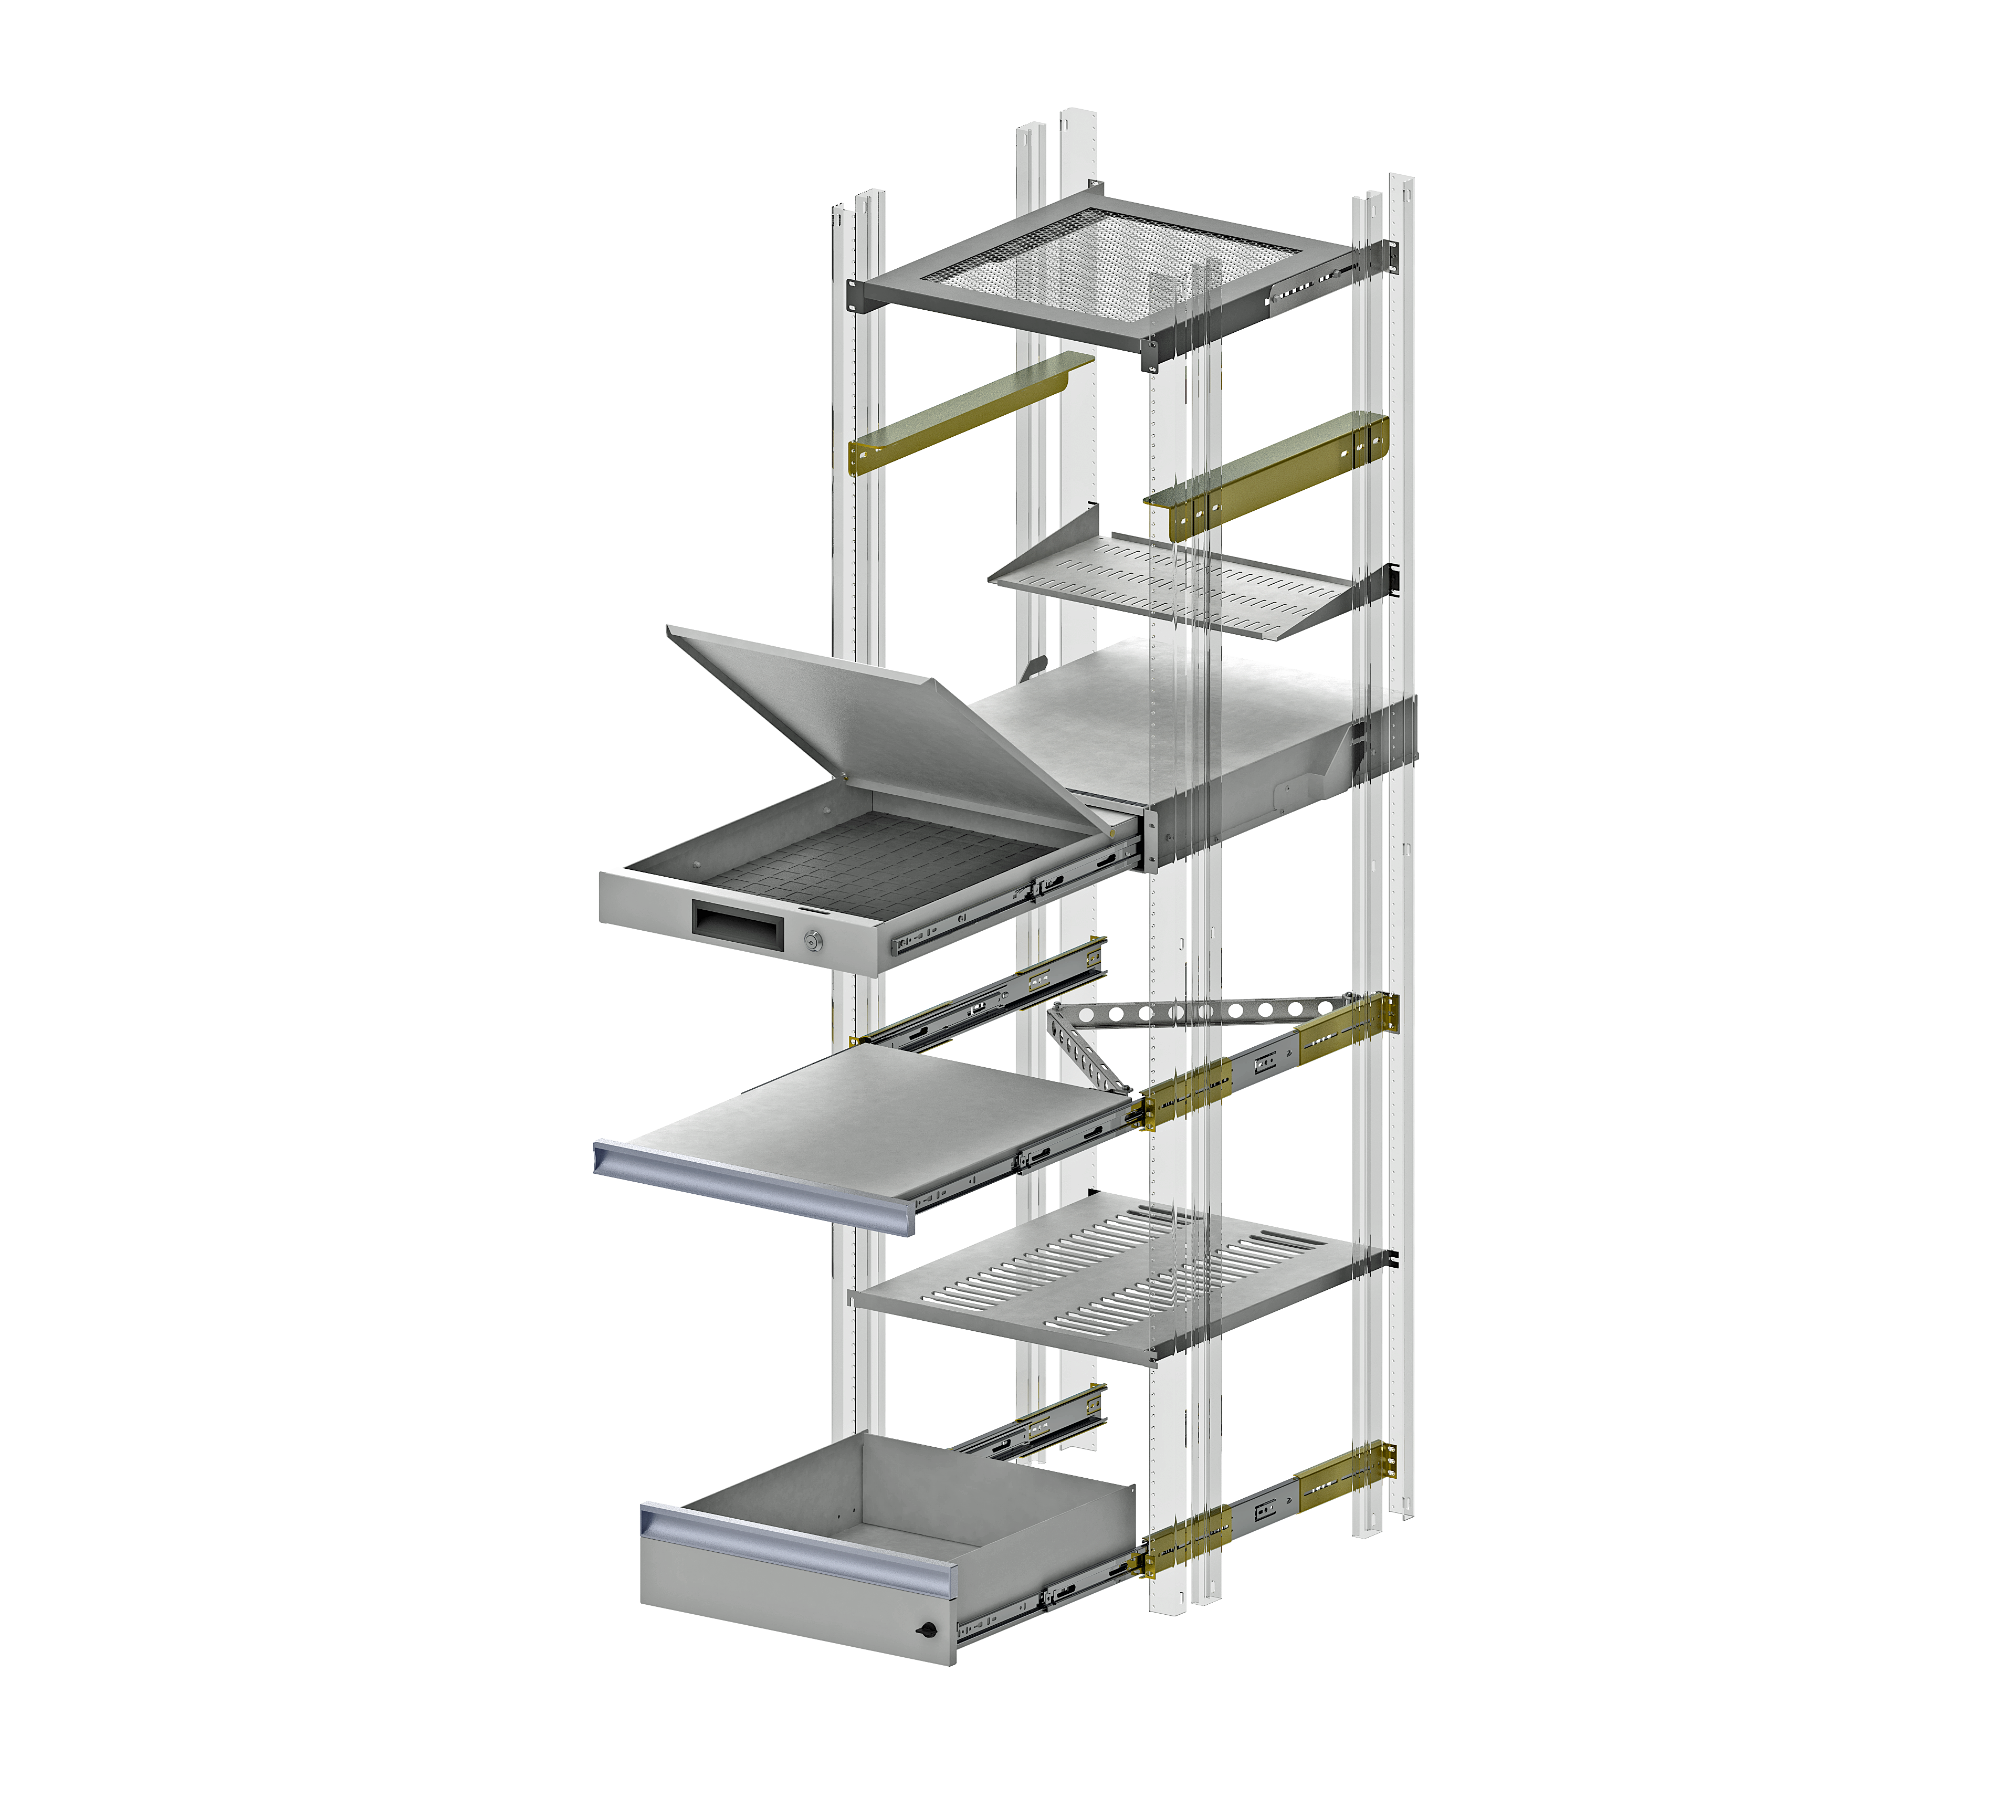 SHELVES DRAWERS CHASSIS SUPPORTS